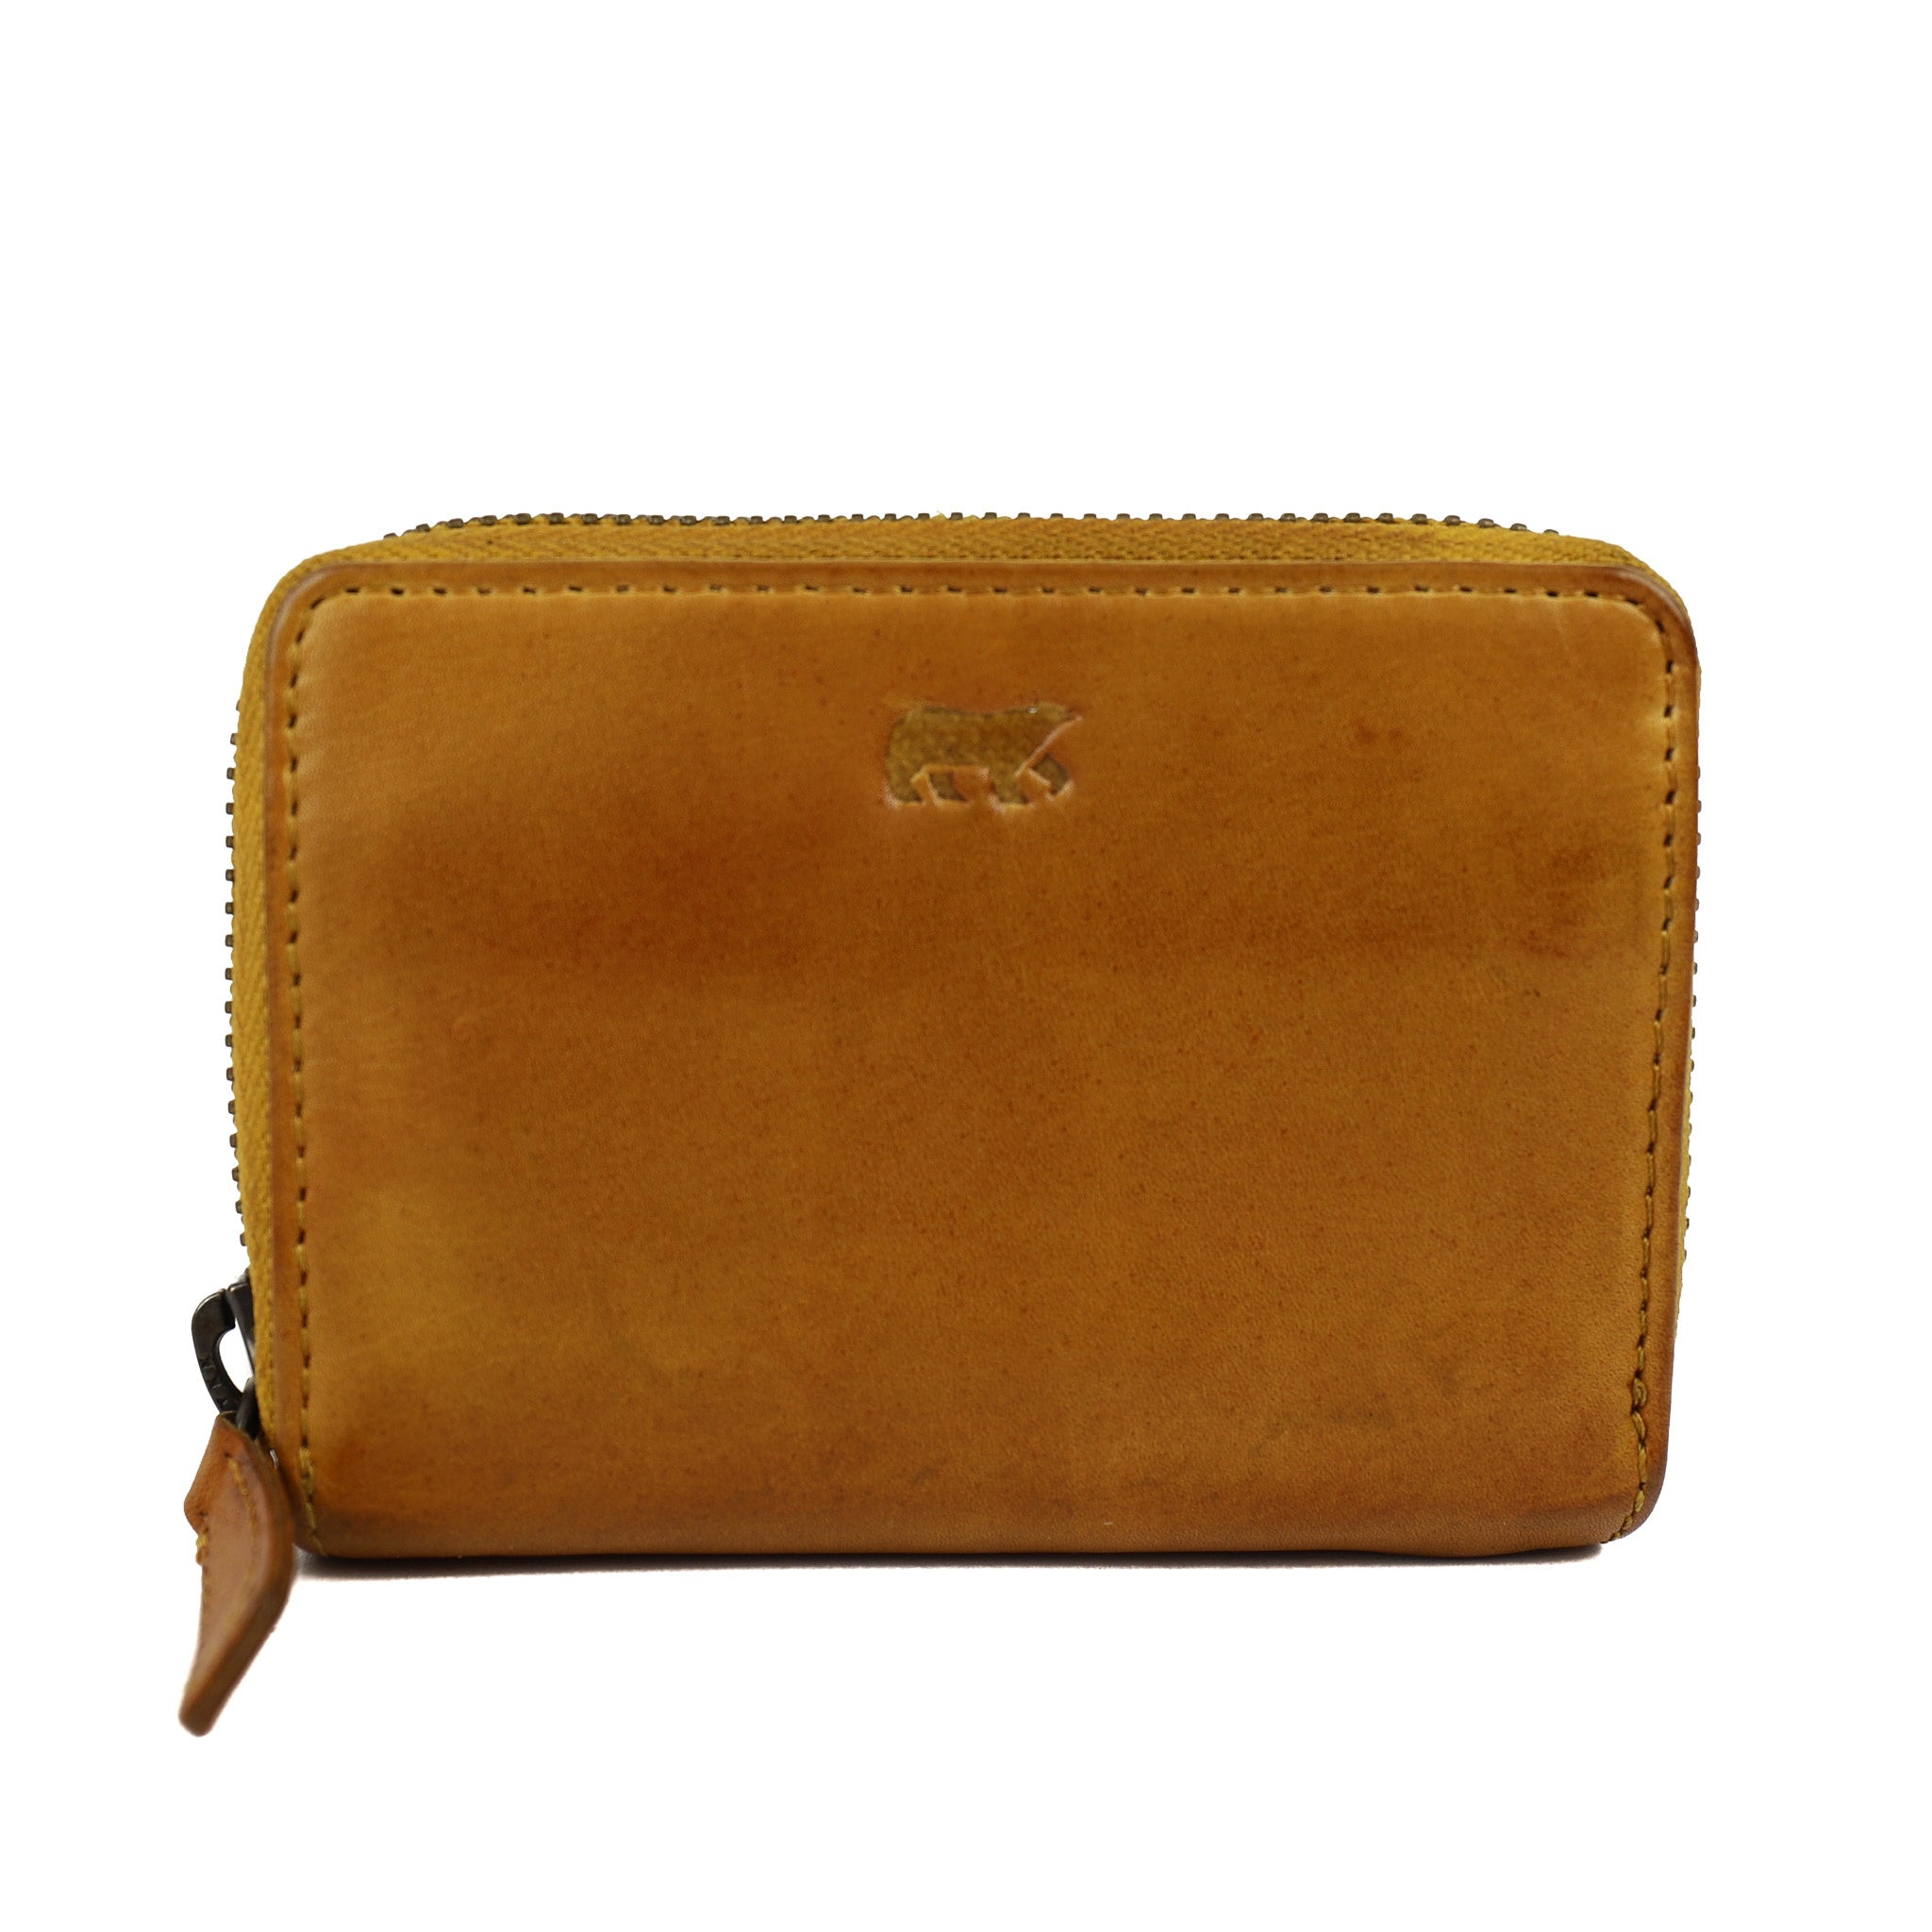 Card holder 'Rudie' yellow - CL 19408